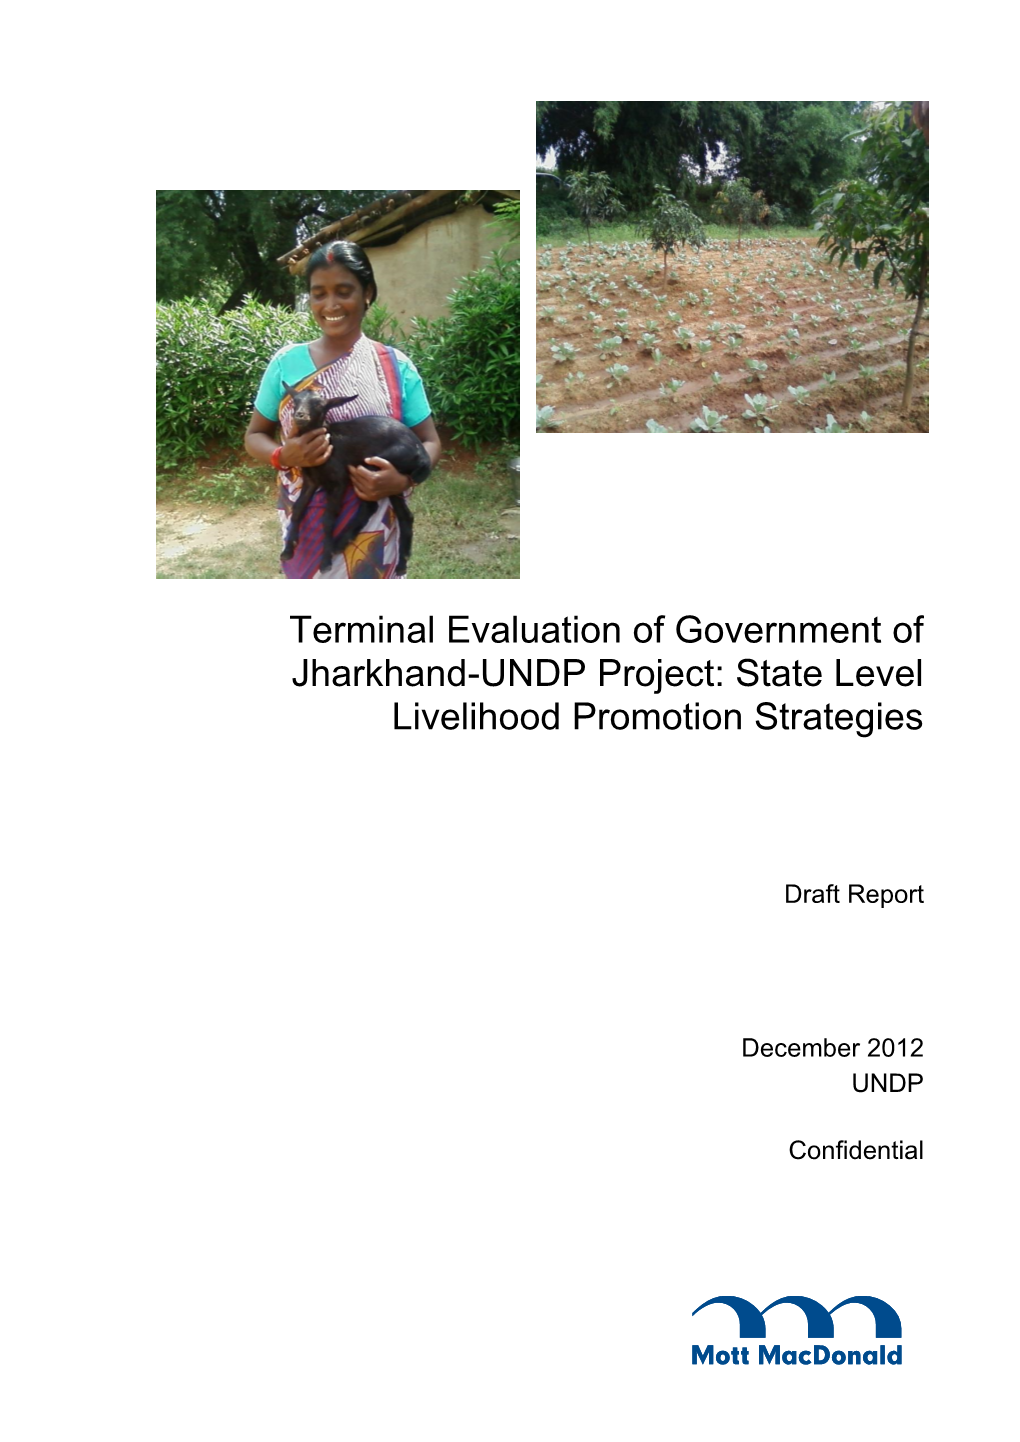 Terminal Evaluation of Government of Jharkhand-UNDP Project: State Level Livelihood Promotion Strategies